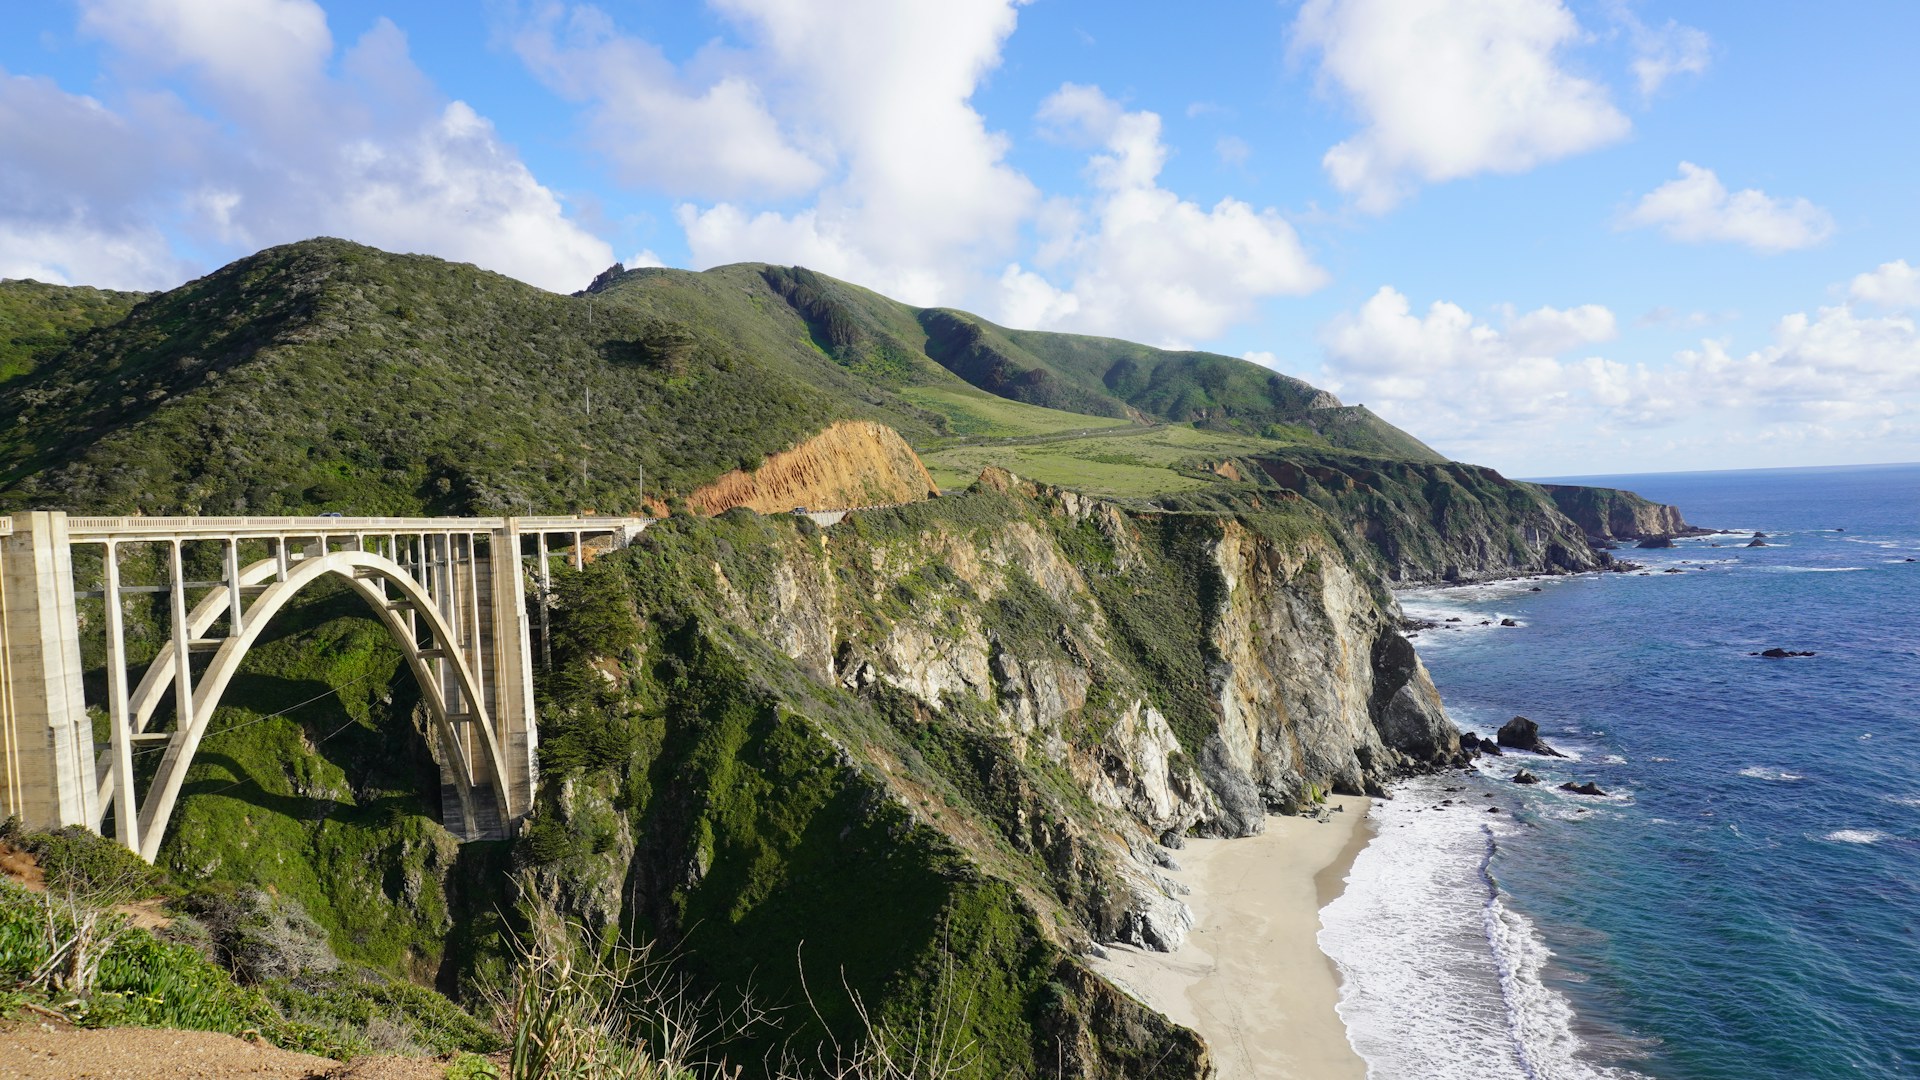 <p><strong><em>1600 miles; 8–12 days duration</em></strong></p>  <p>The Pacific Coast Highway, which is also known as the PCH, is California's most recognized route. It is almost 1600 miles and is one of the most famous road trips in the world. The route starts in Monterey and goes to Los Angeles. It leads us through ocean vistas, cute little coastal towns, and places like Big Sur and the Golden Gate Bridge.</p>  <p>You can check out several charming hamlets on this journey and even explore the <a href="https://santabarbaraca.com/itinerary/how-santa-barbara-got-its-spanish-vibe/">Spanish-influenced architecture</a> of Santa Barbara. Don't forget to stop at <a href="https://www.parks.ca.gov/?page_id=623" rel="noreferrer noopener">Point Dume State Beach</a> for a breathtaking view of dolphins and migrating whales in the ocean water. Eat seafood in Monterey, cheeses in Point Reyes, and gourmet food in Santa Barbara.</p>